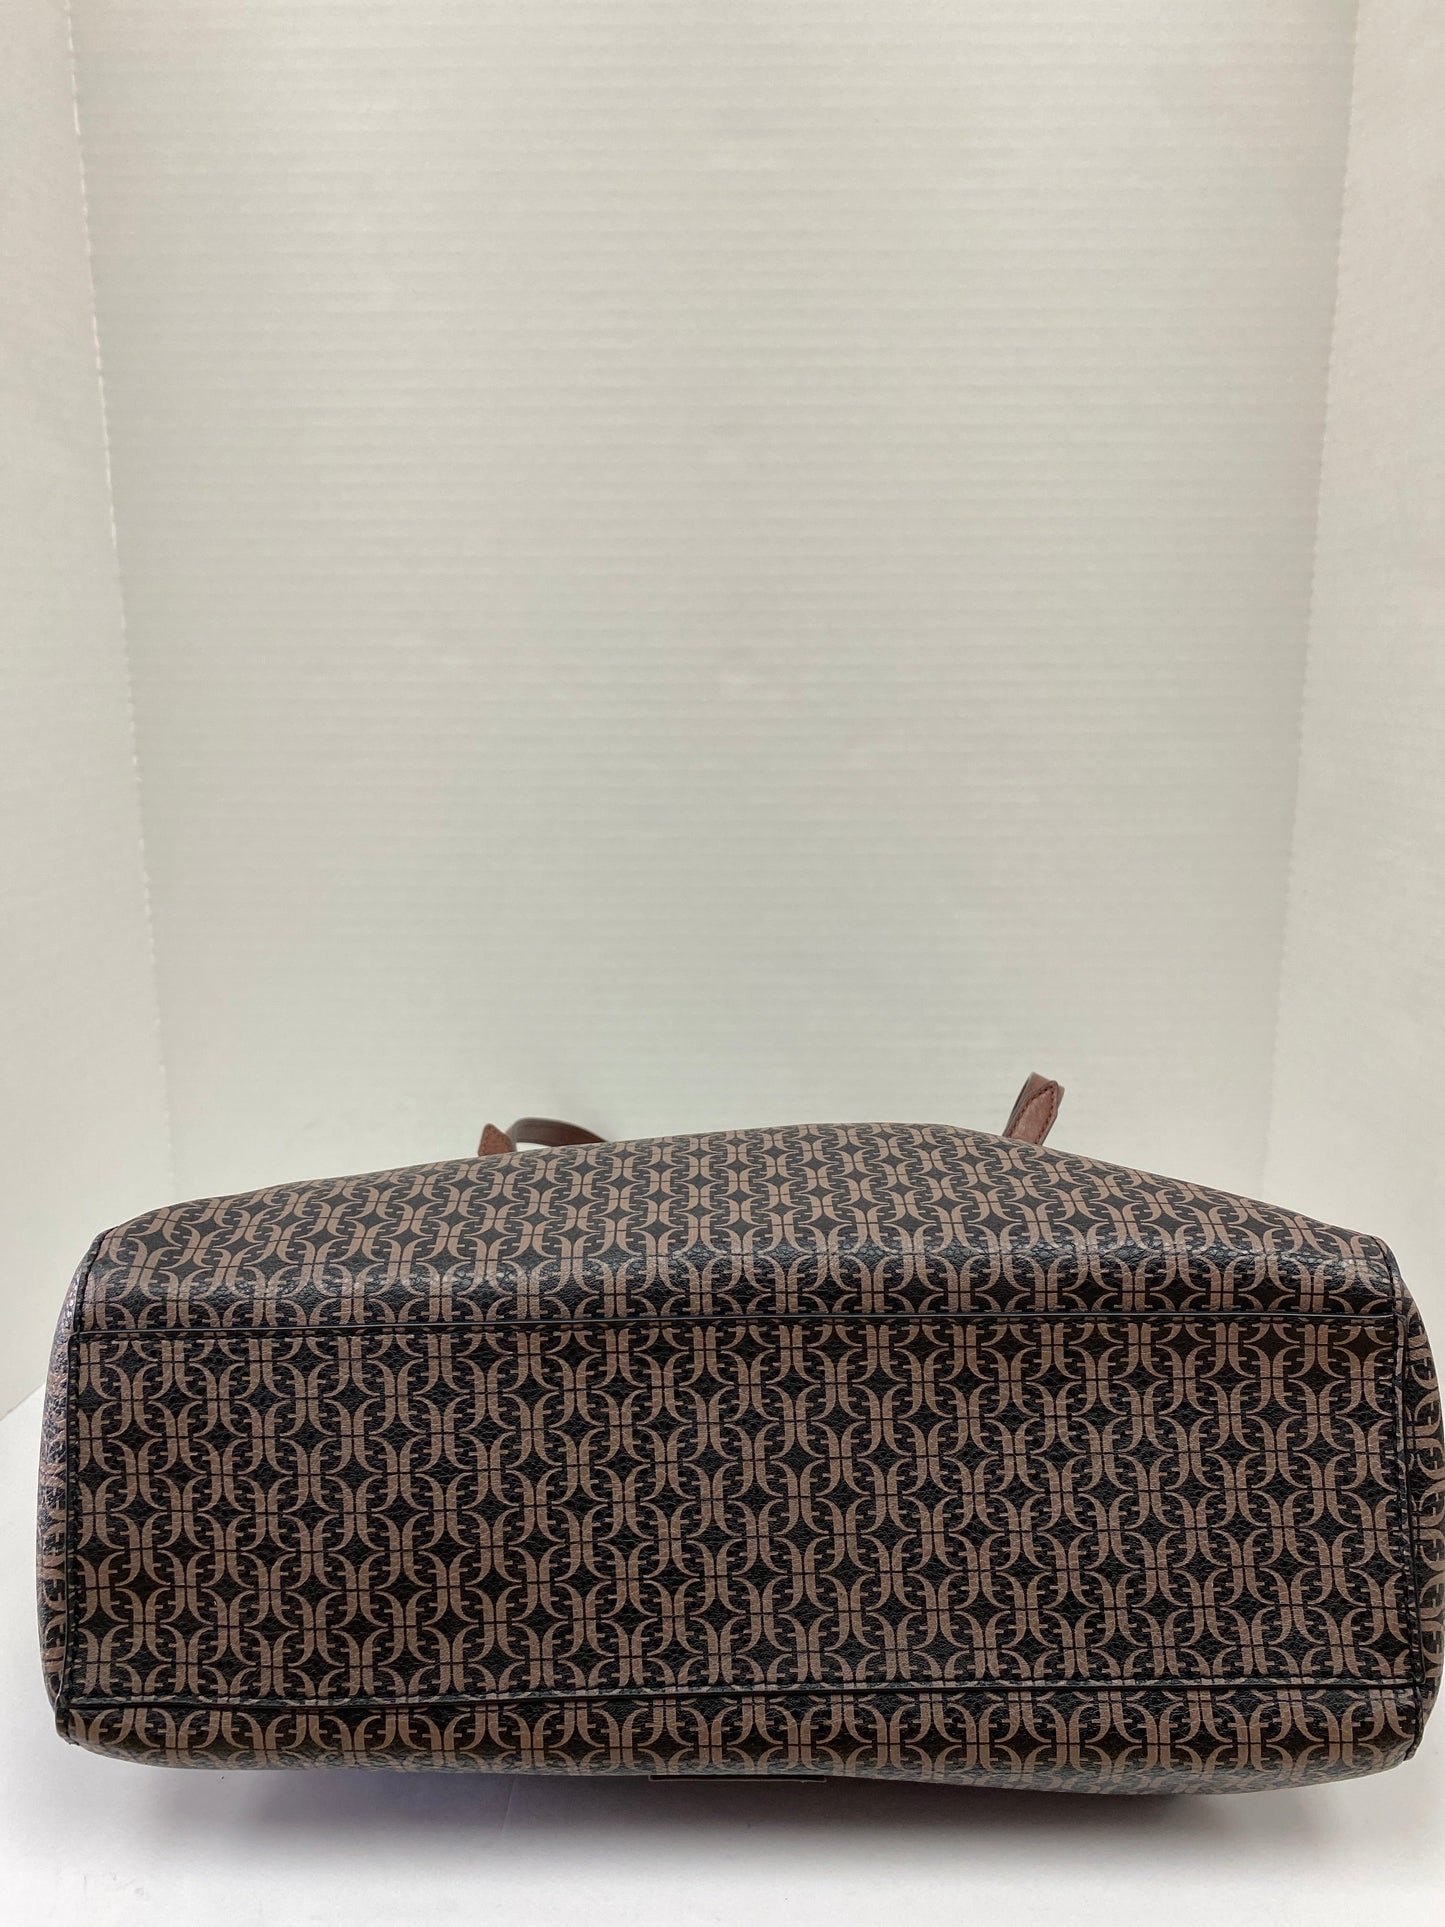 Handbag By Fossil  Size: Large